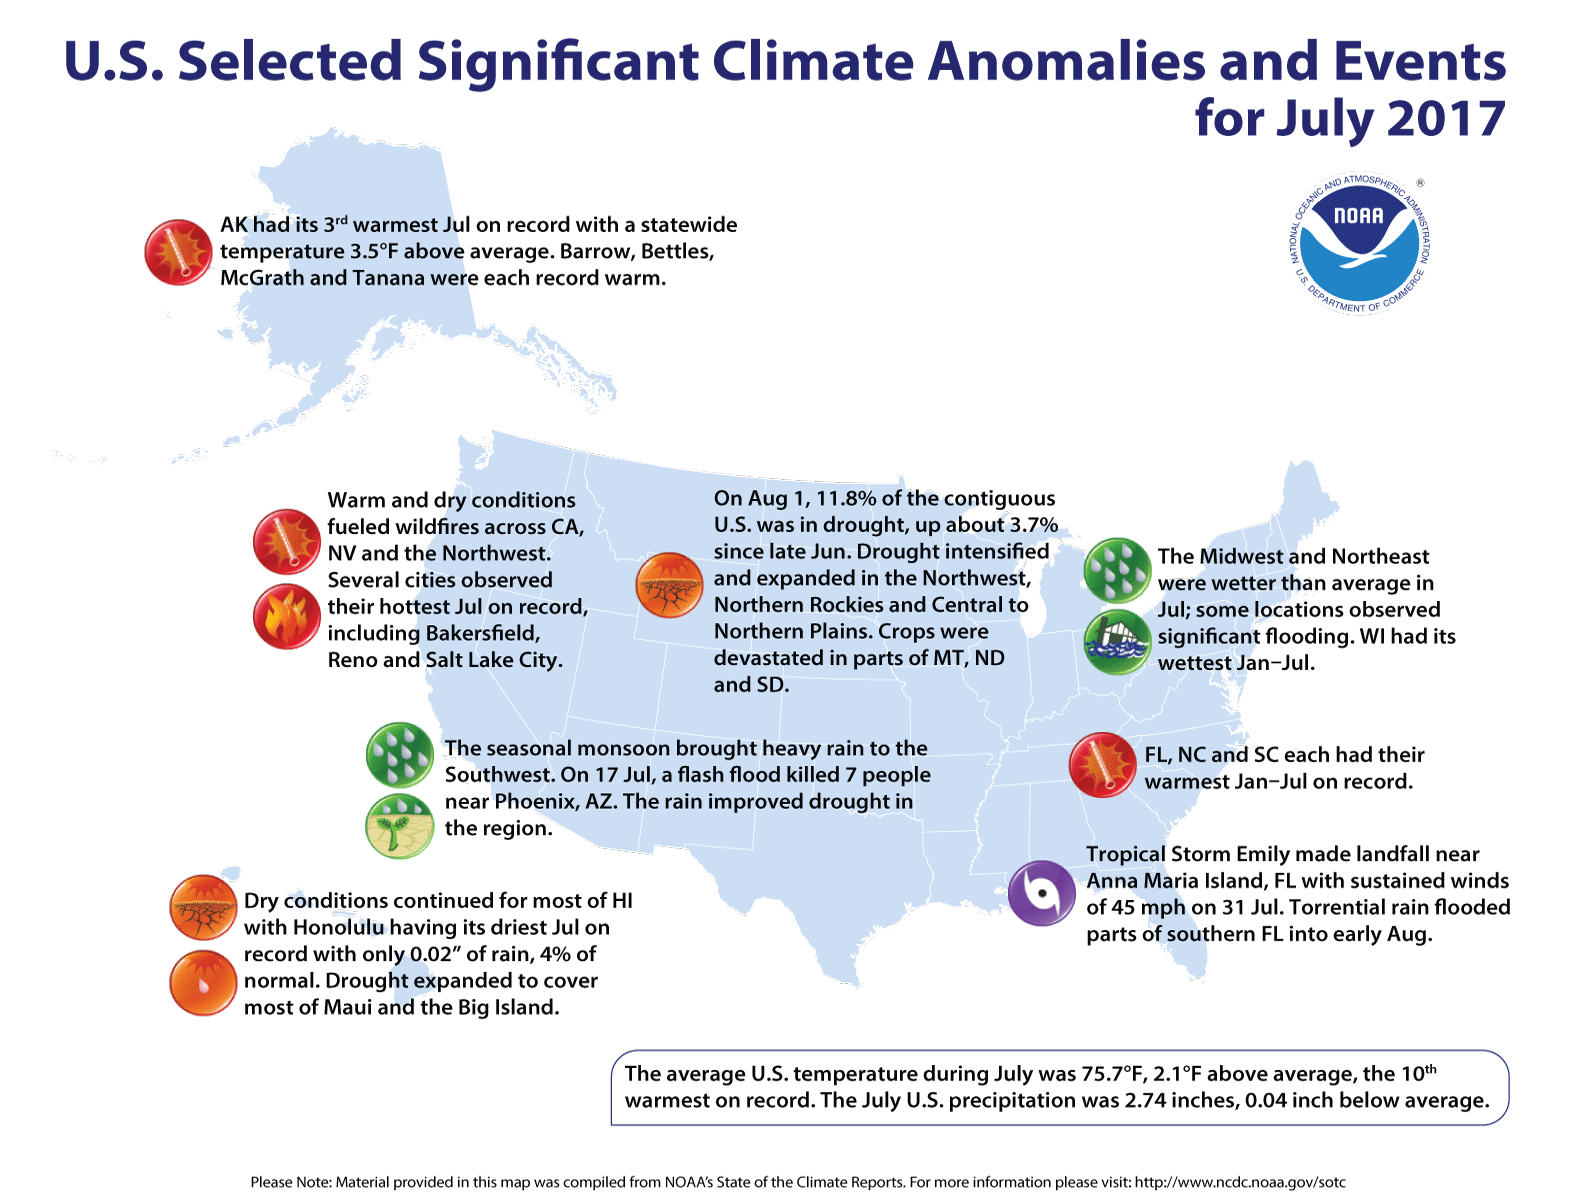 See what other climate events occurred across the country in July.